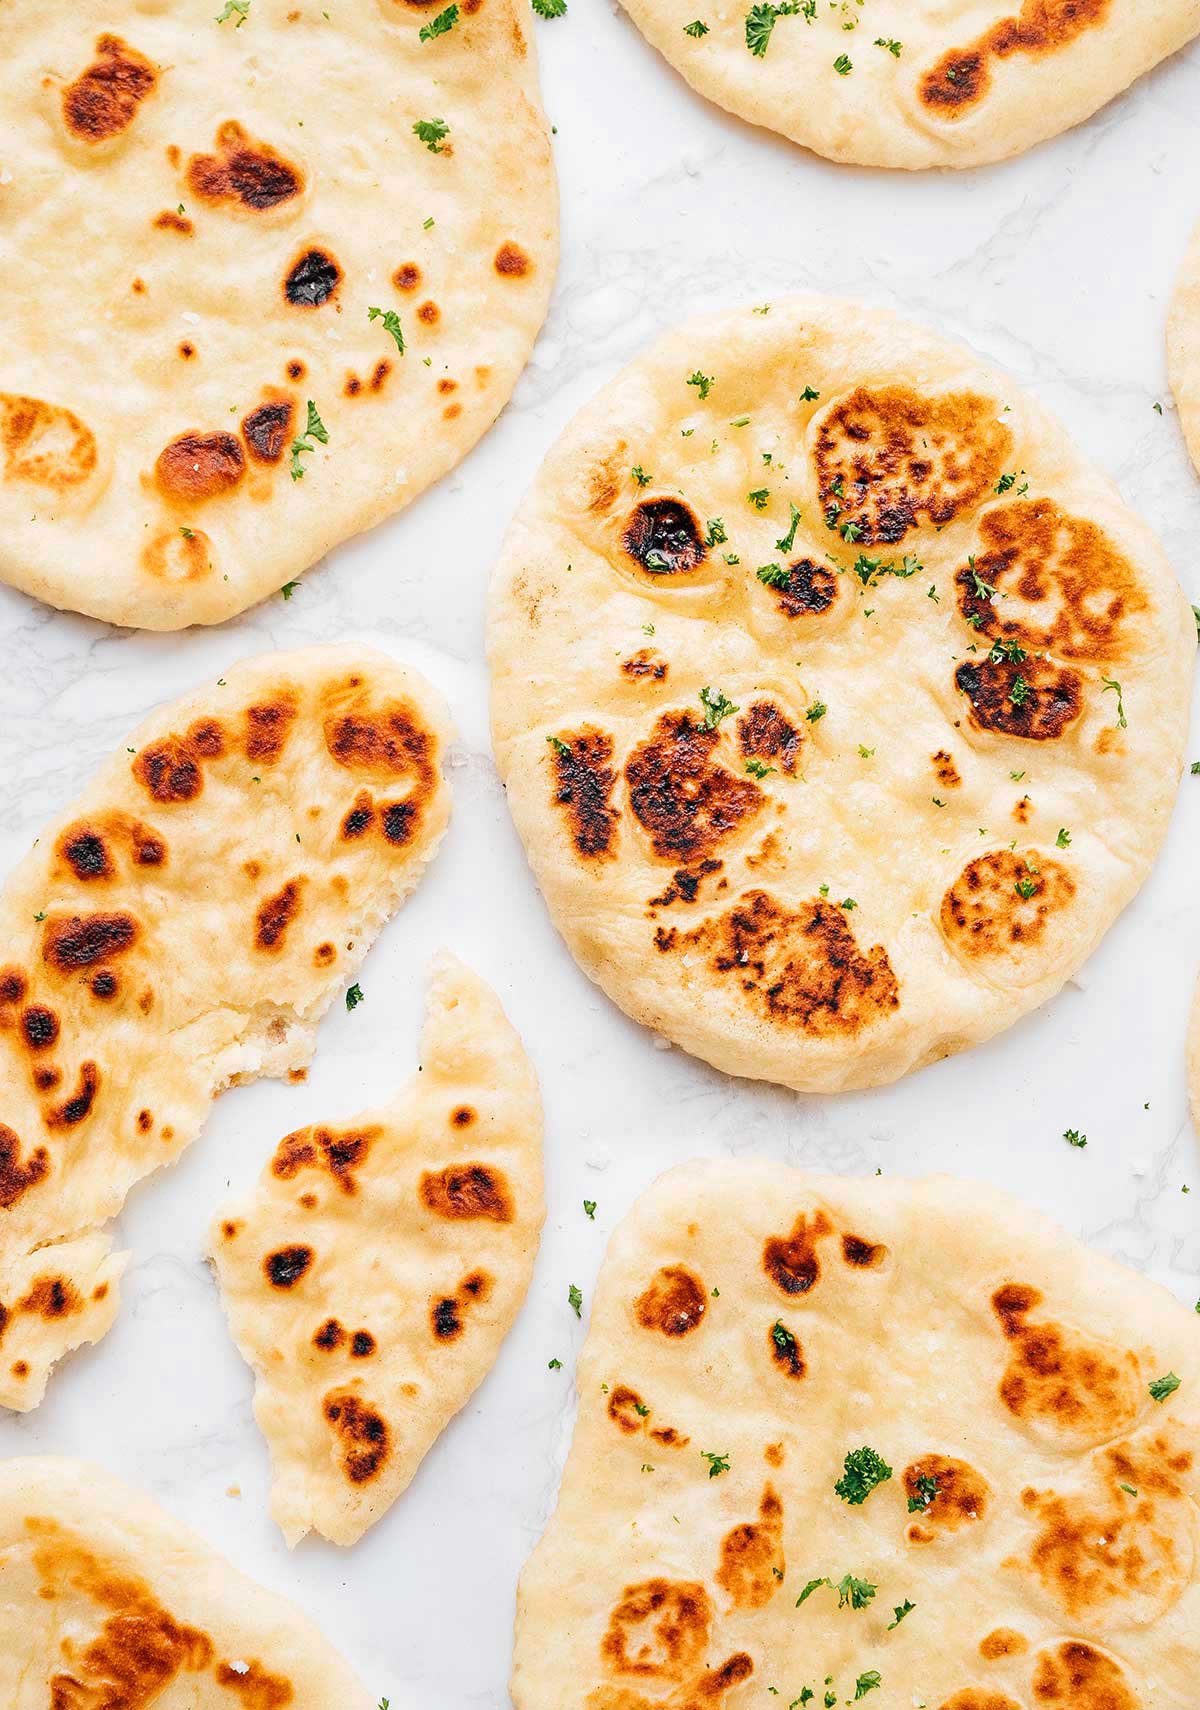 Naan bread slices laid out flat on a white background